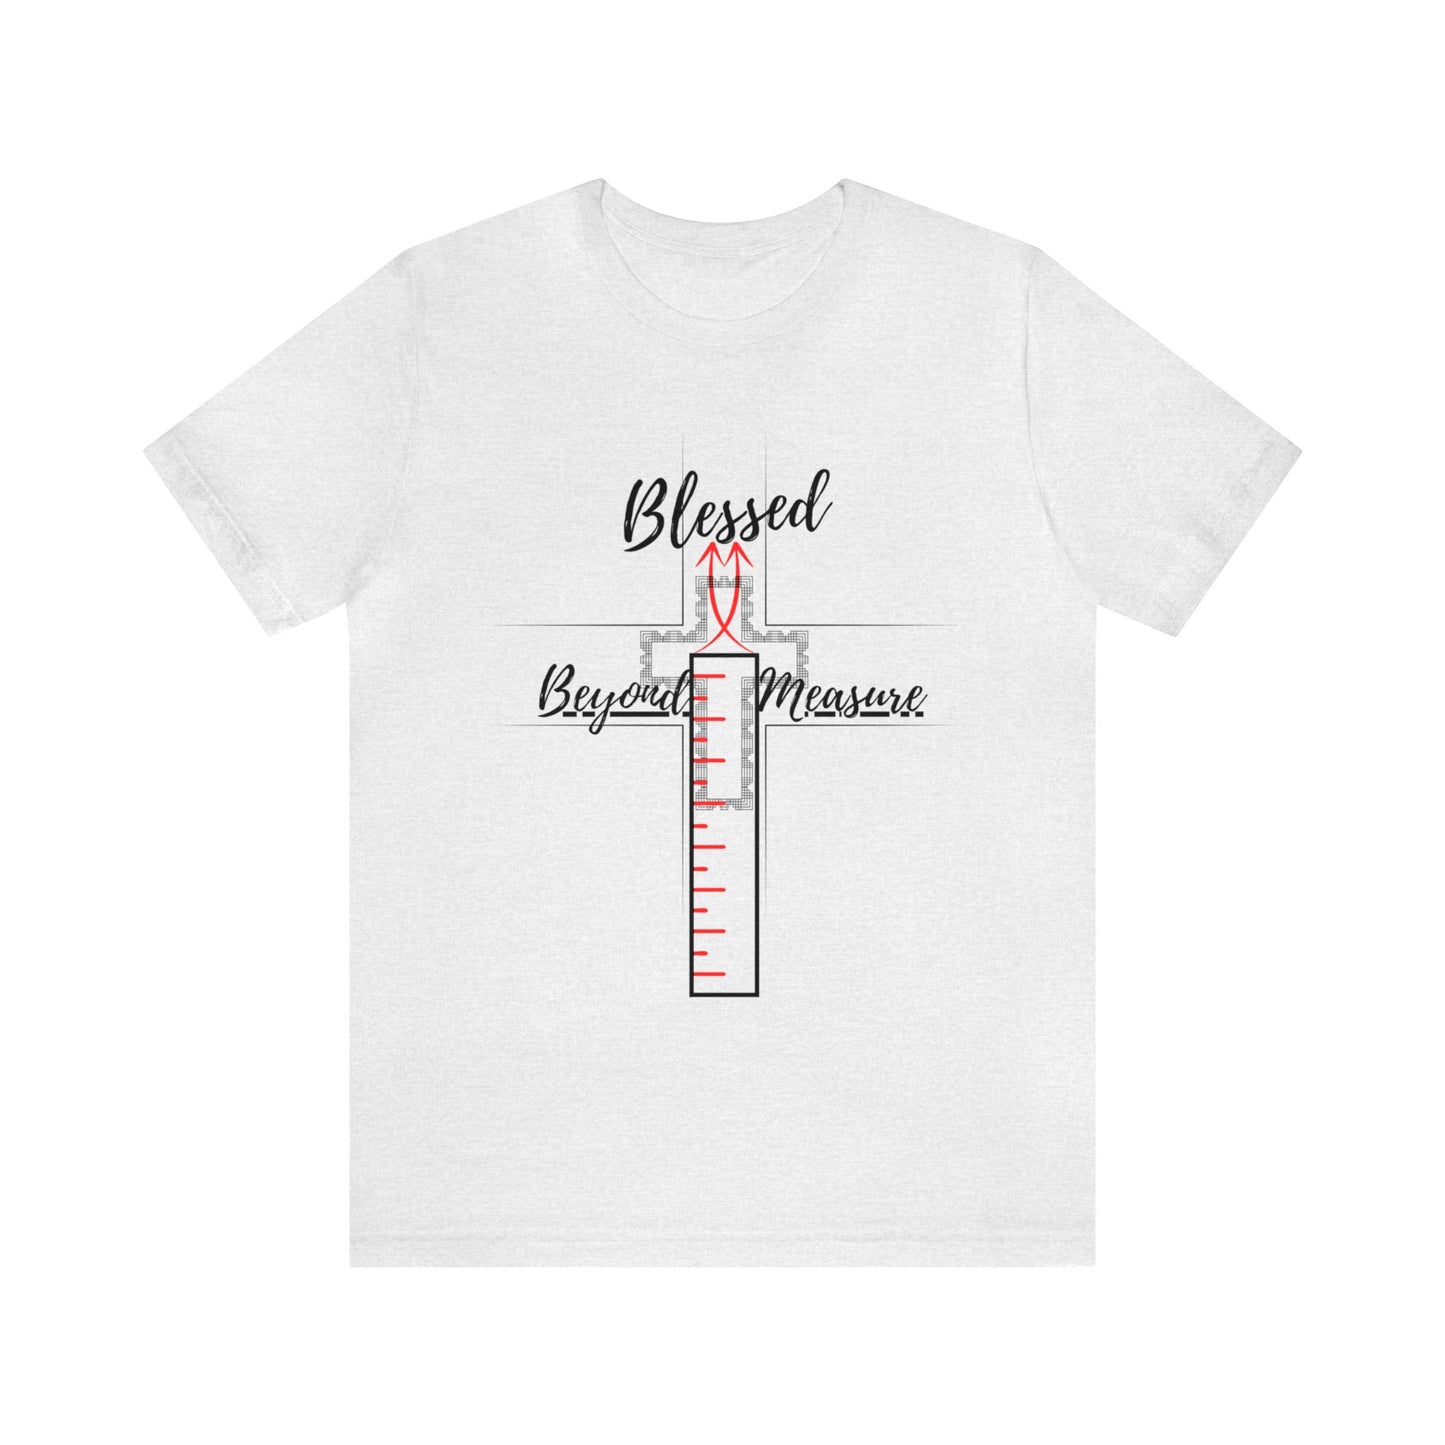 Blessed Beyond Measure! [Indeed you are!] Unisex T-Shirt